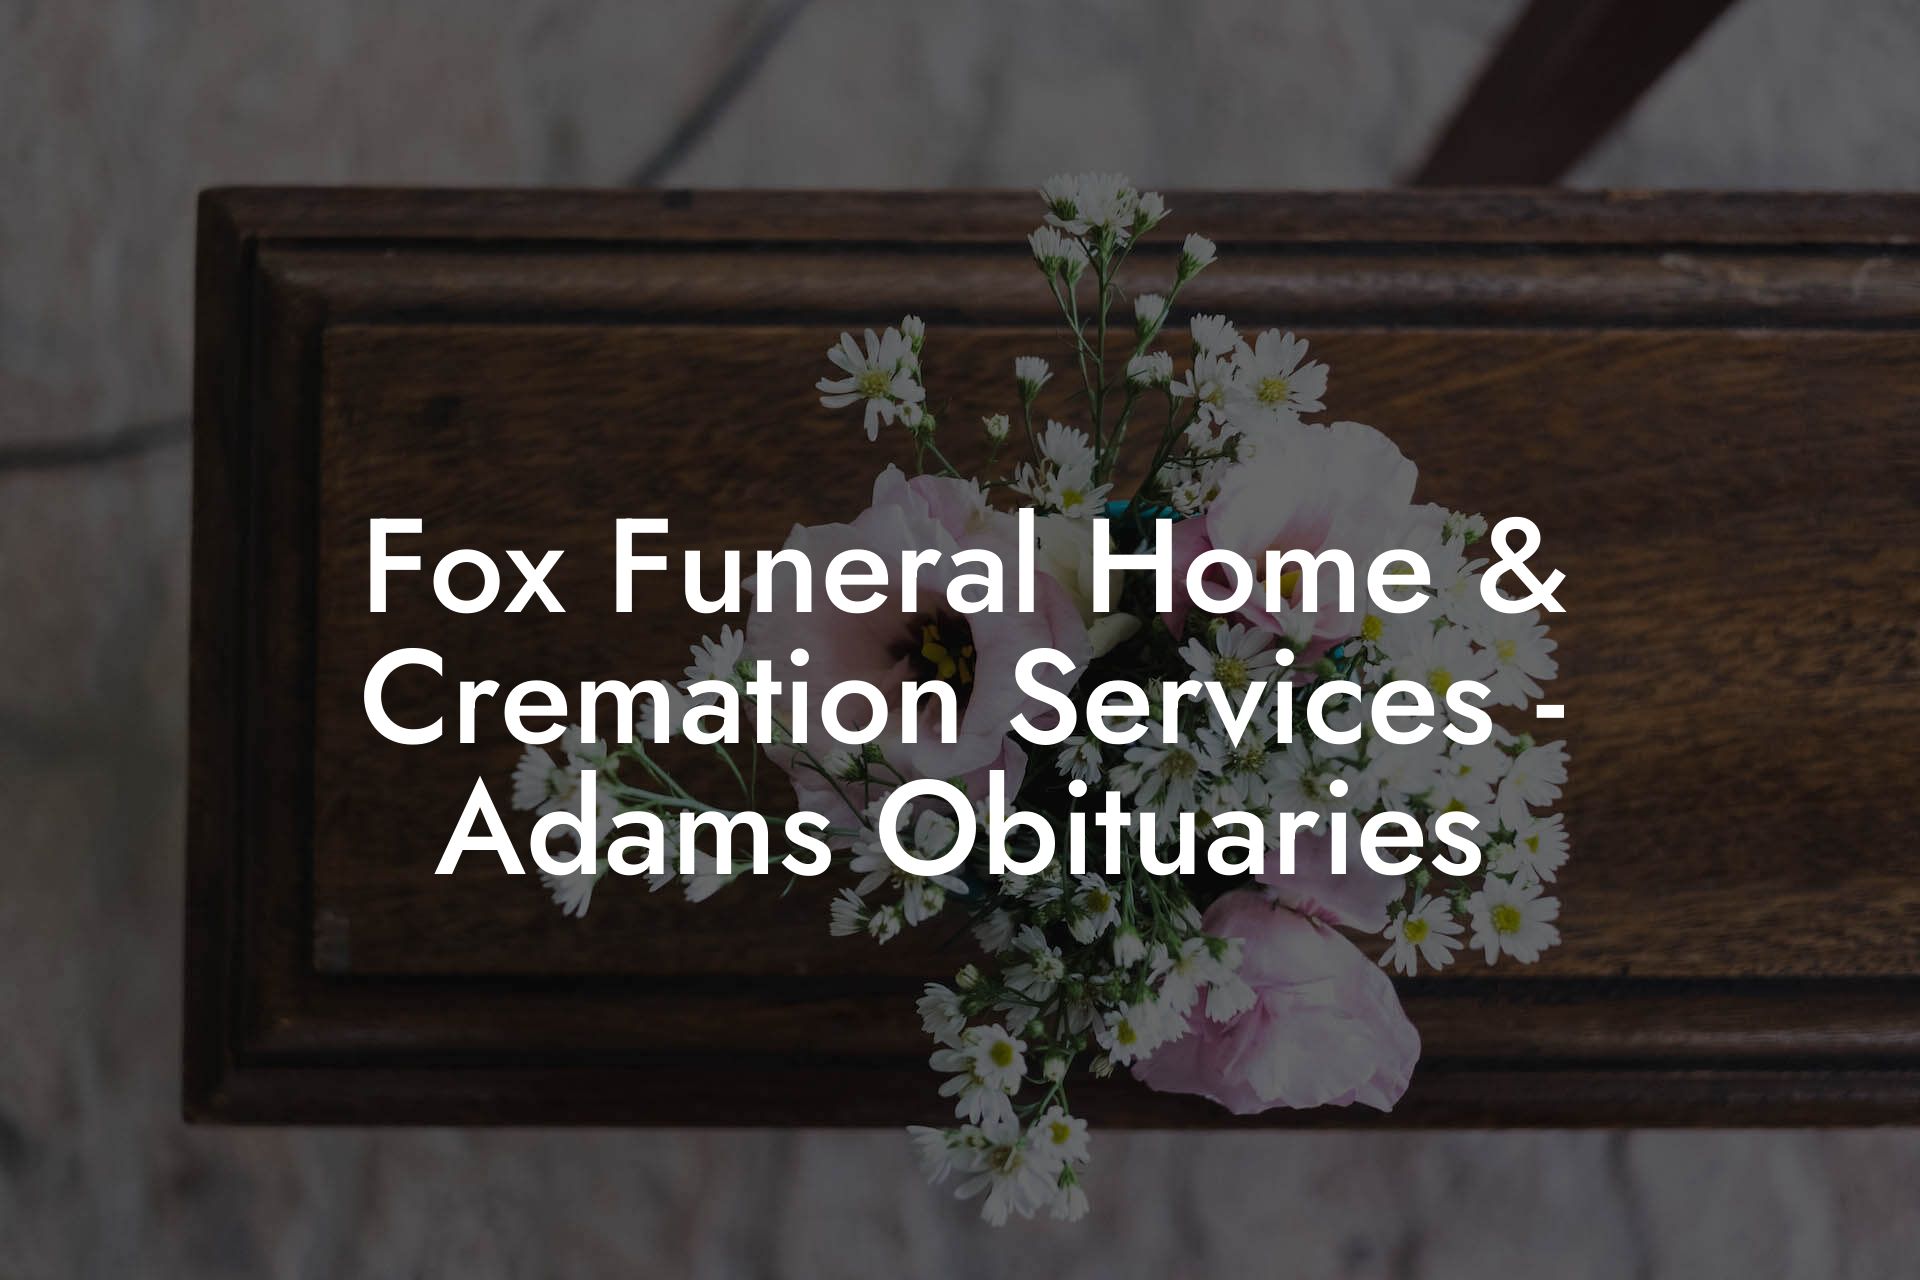 Fox Funeral Home & Cremation Services - Adams Obituaries